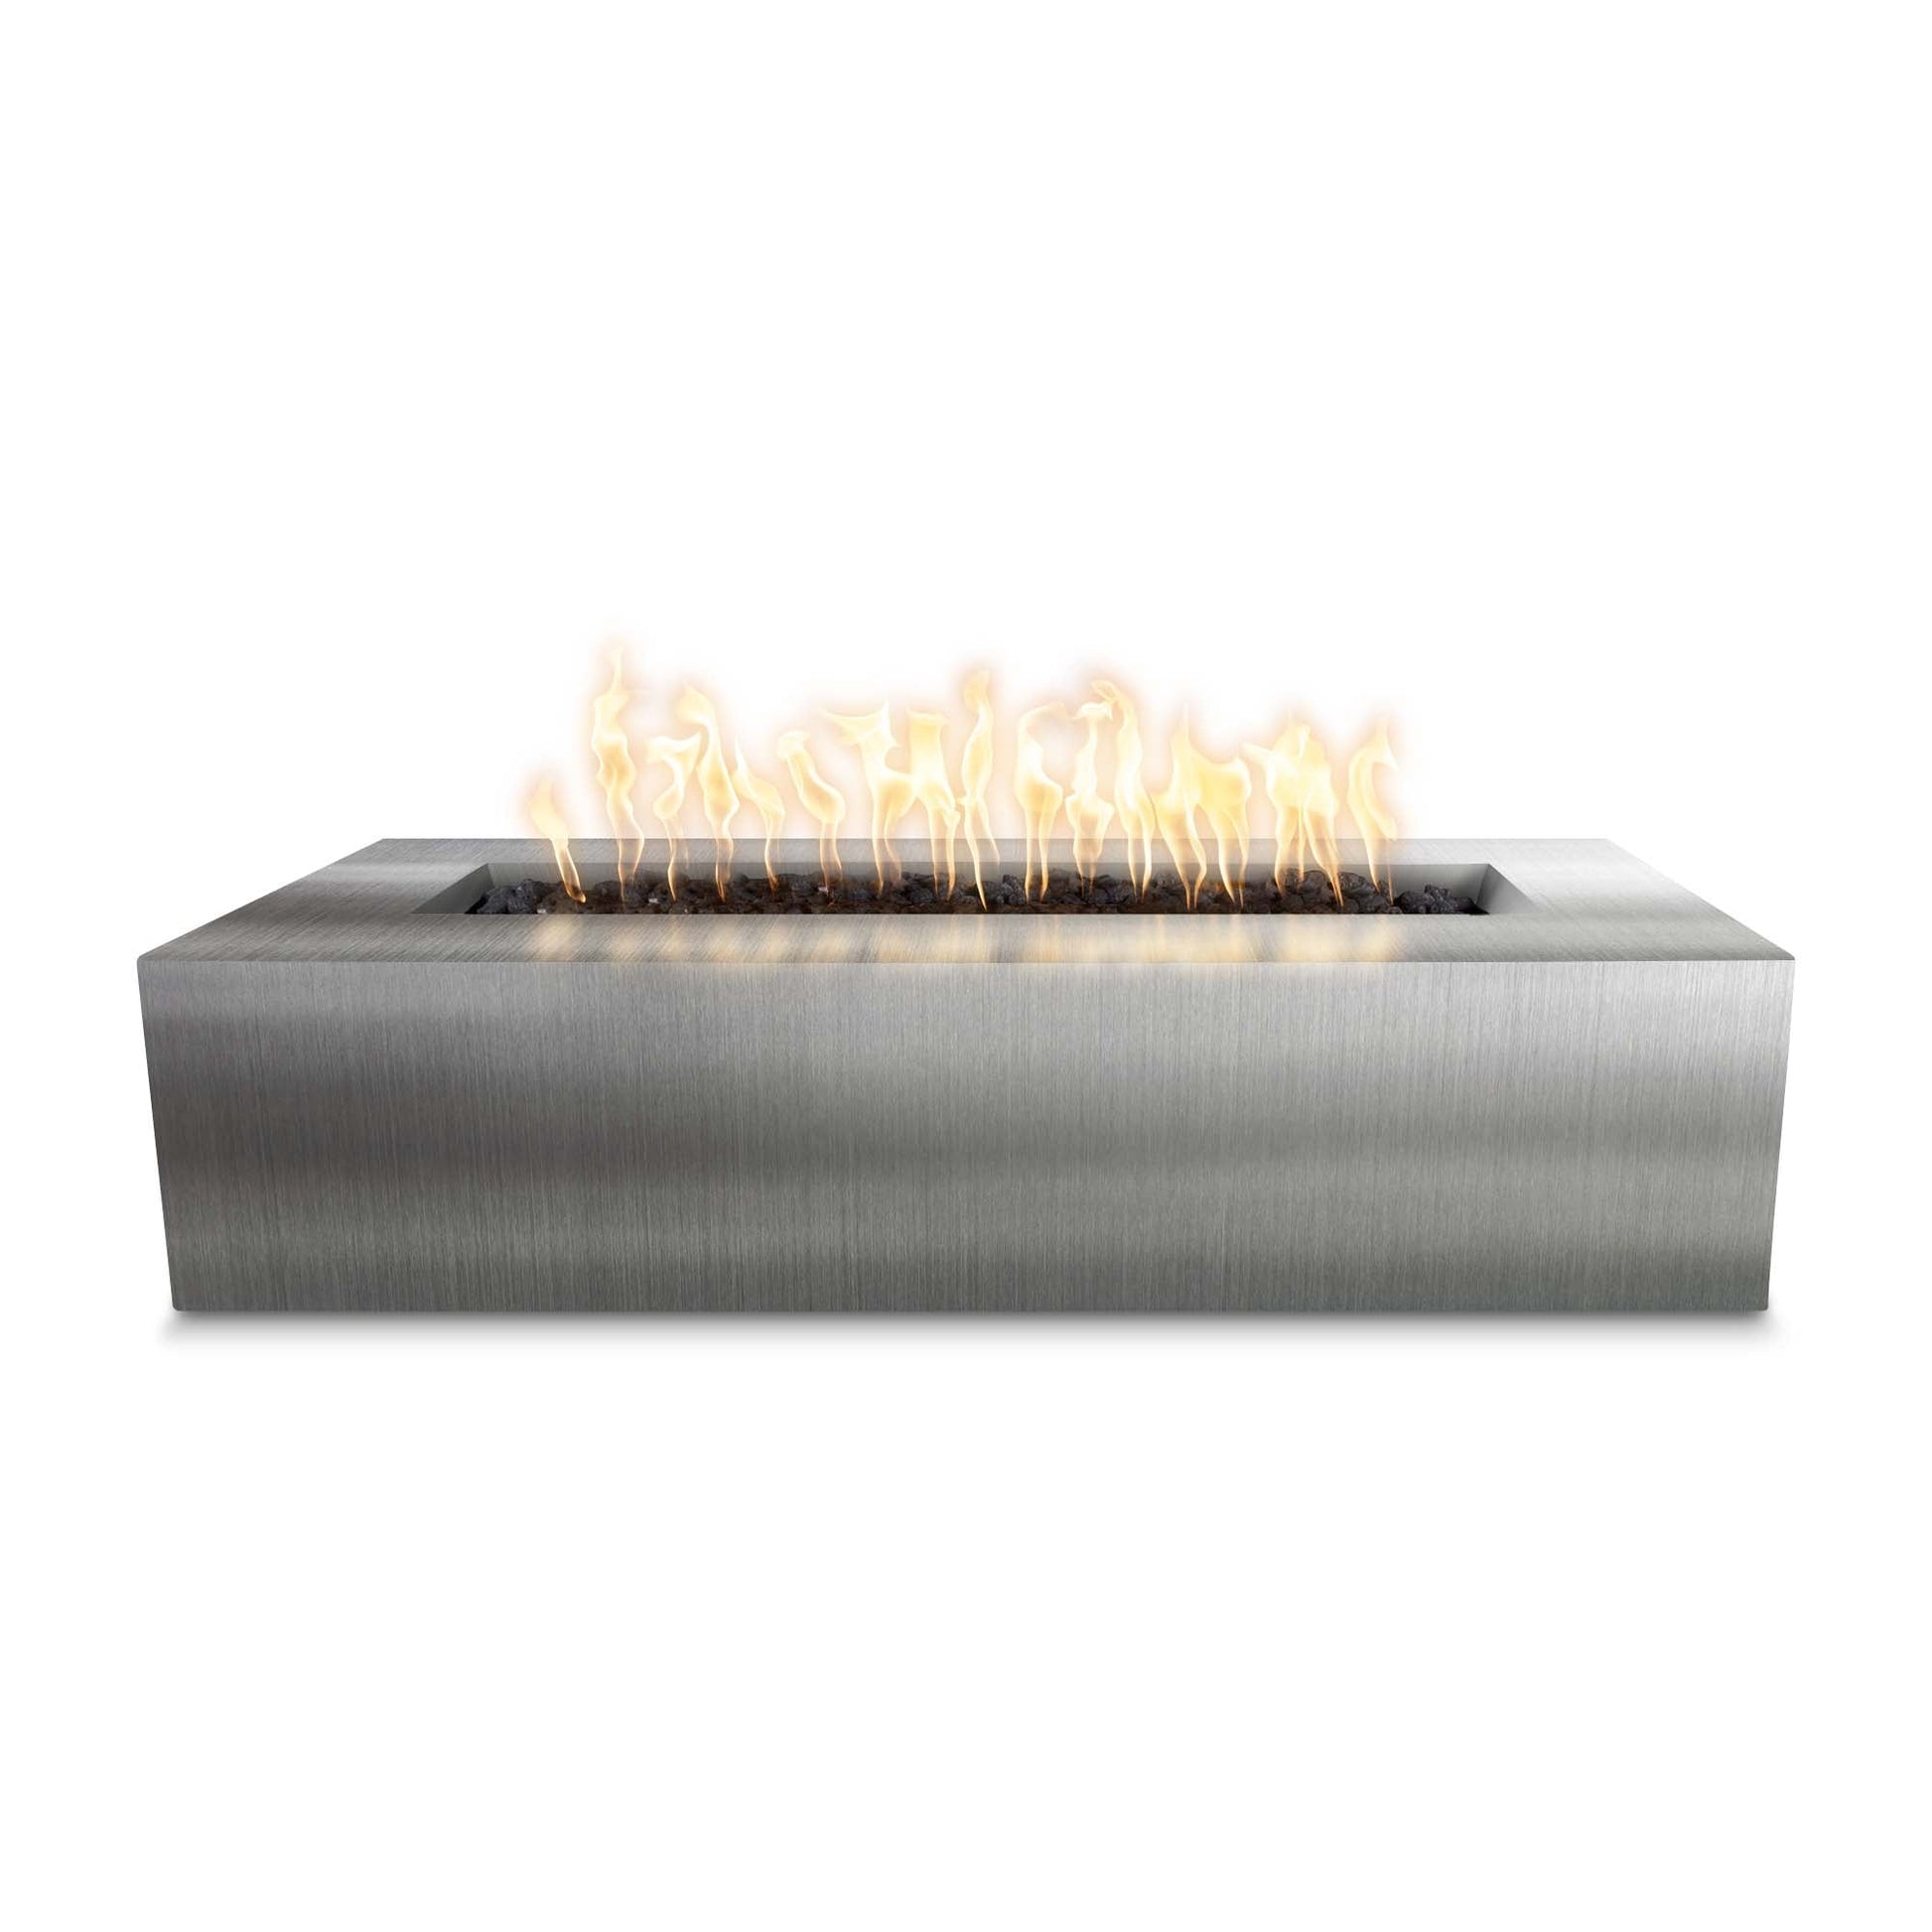 The Outdoor Plus Rectangular Regal 48" Stainless Steel Natural Gas Fire Pit with Match Lit Ignition